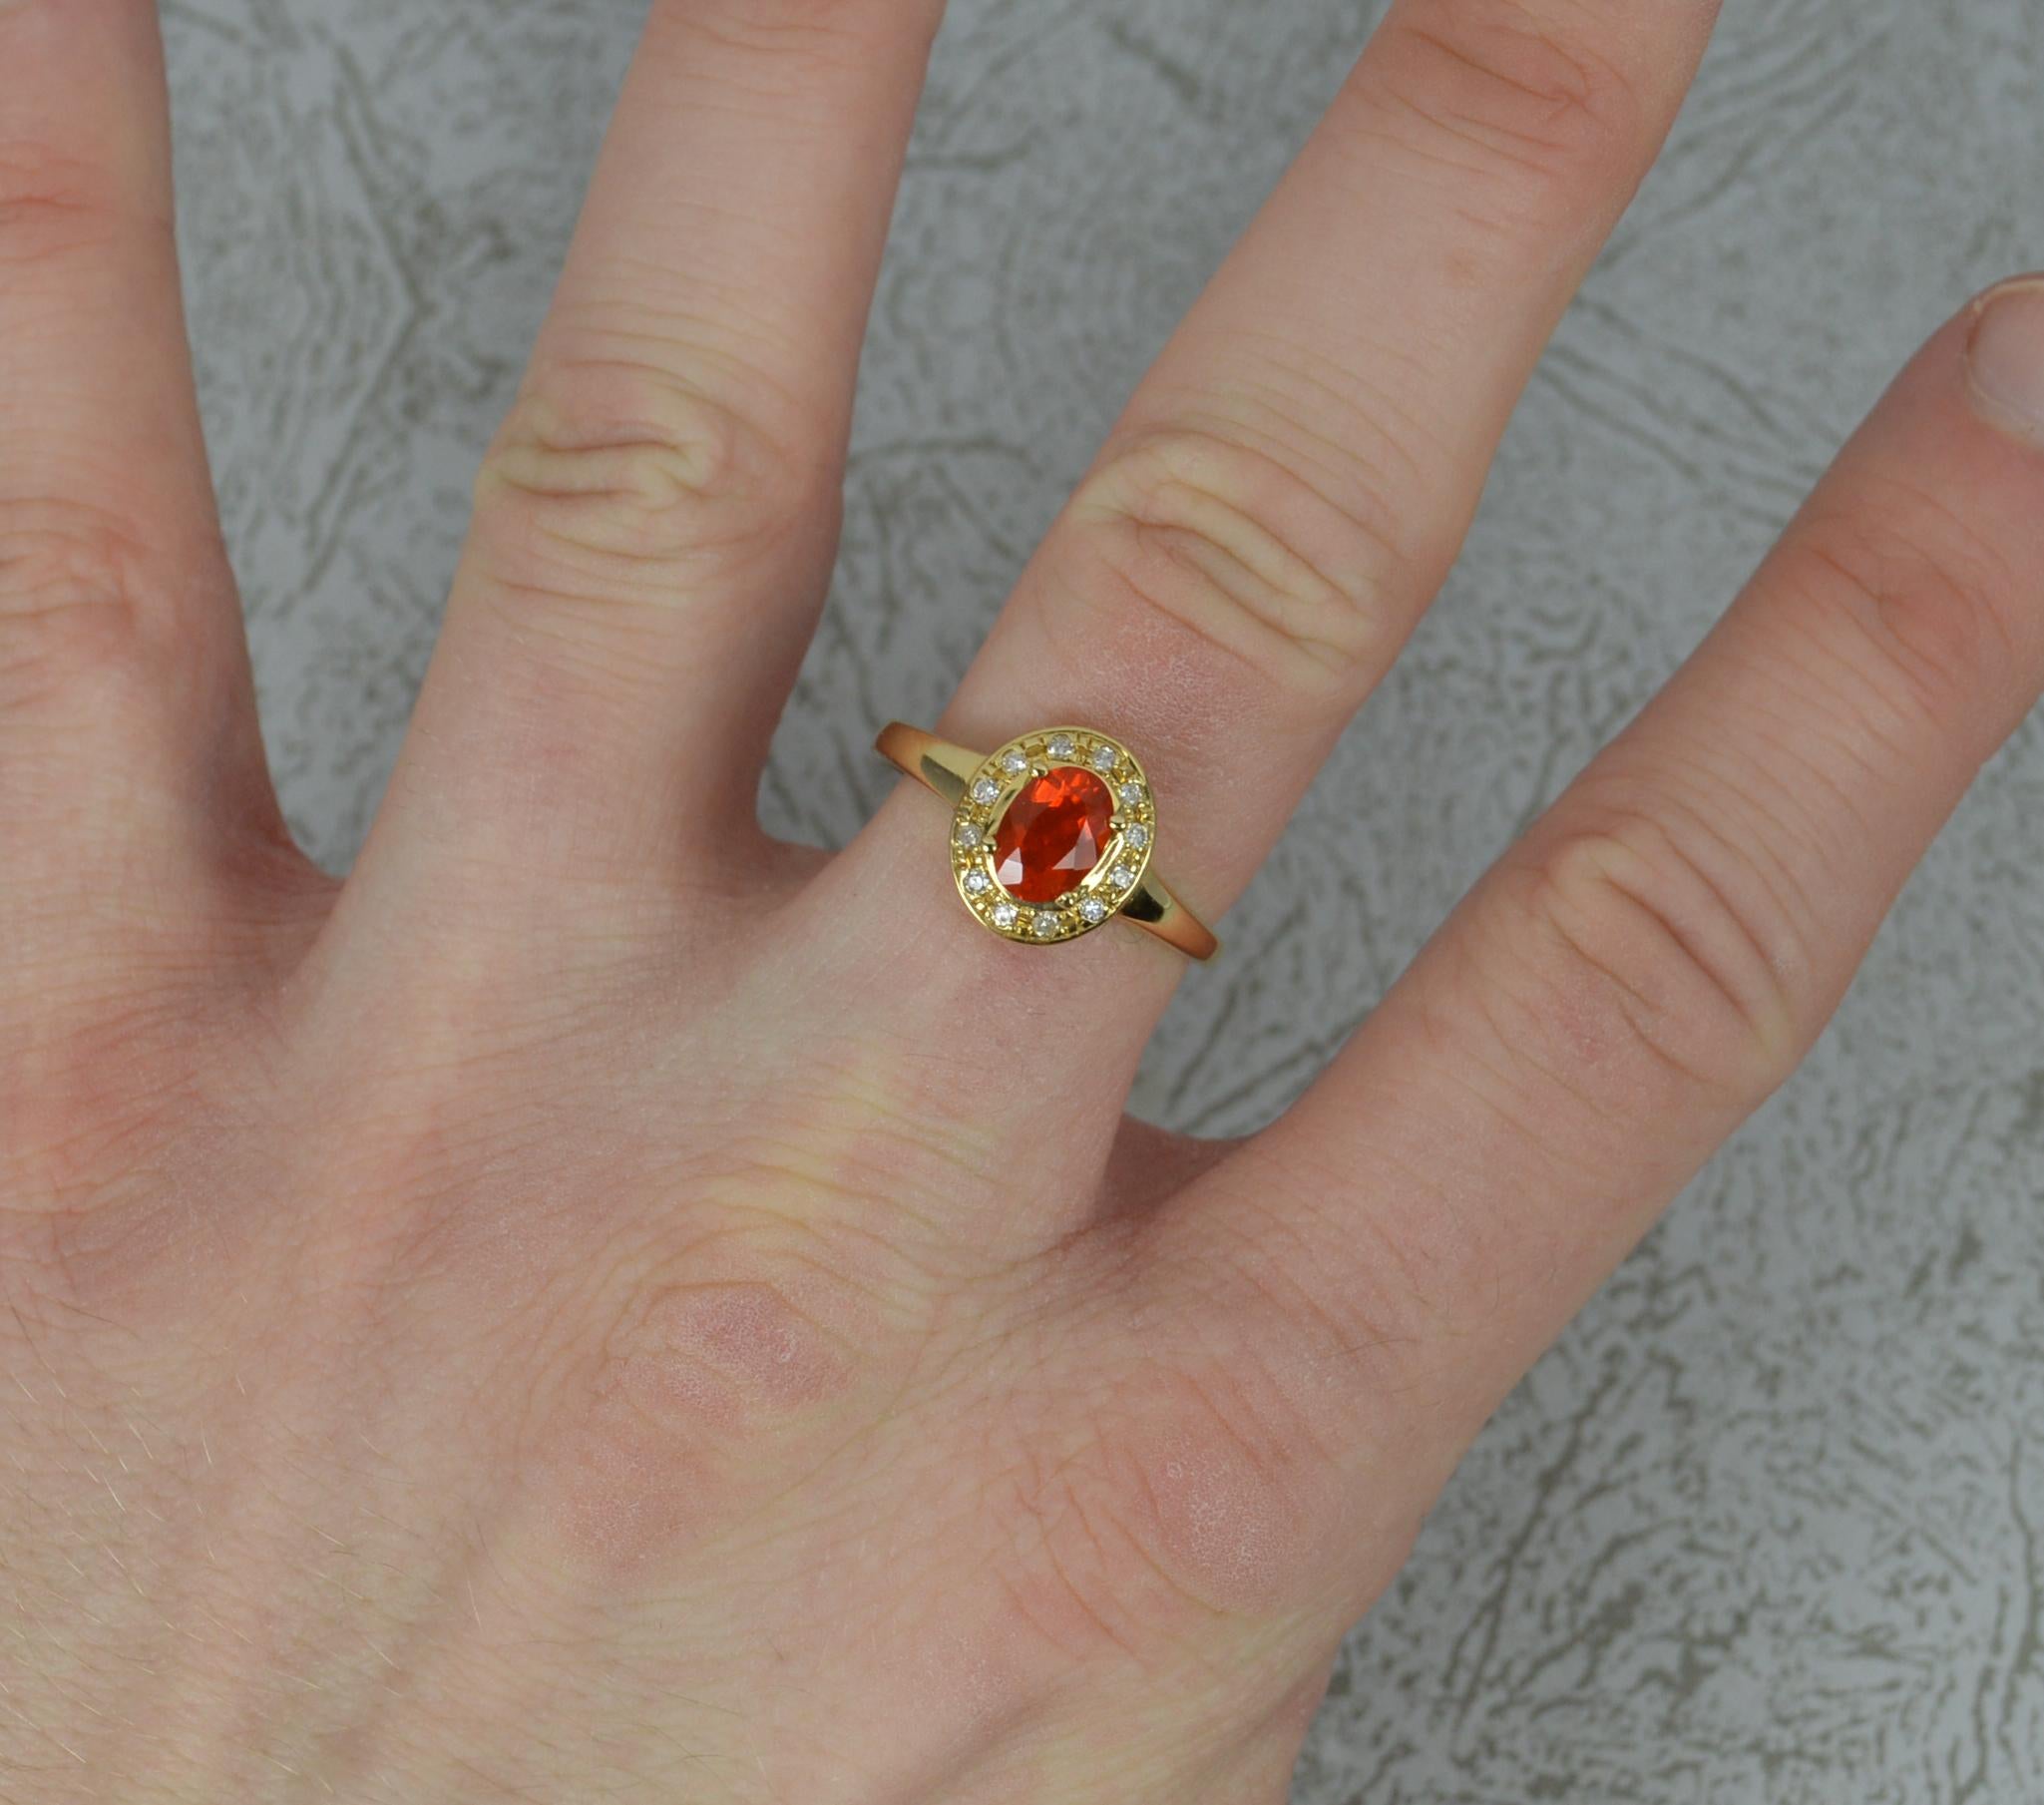 A superb Fire Opal and Diamond ring.
18 carat yellow gold example.
5.1mm x 7.1mm oval fire opal to centre in four claw setting surrounded by 12 natural diamonds.
9.8mm x 11.3mm cluster head.

Condition ; Excellent. Well set stones. Strong and solid